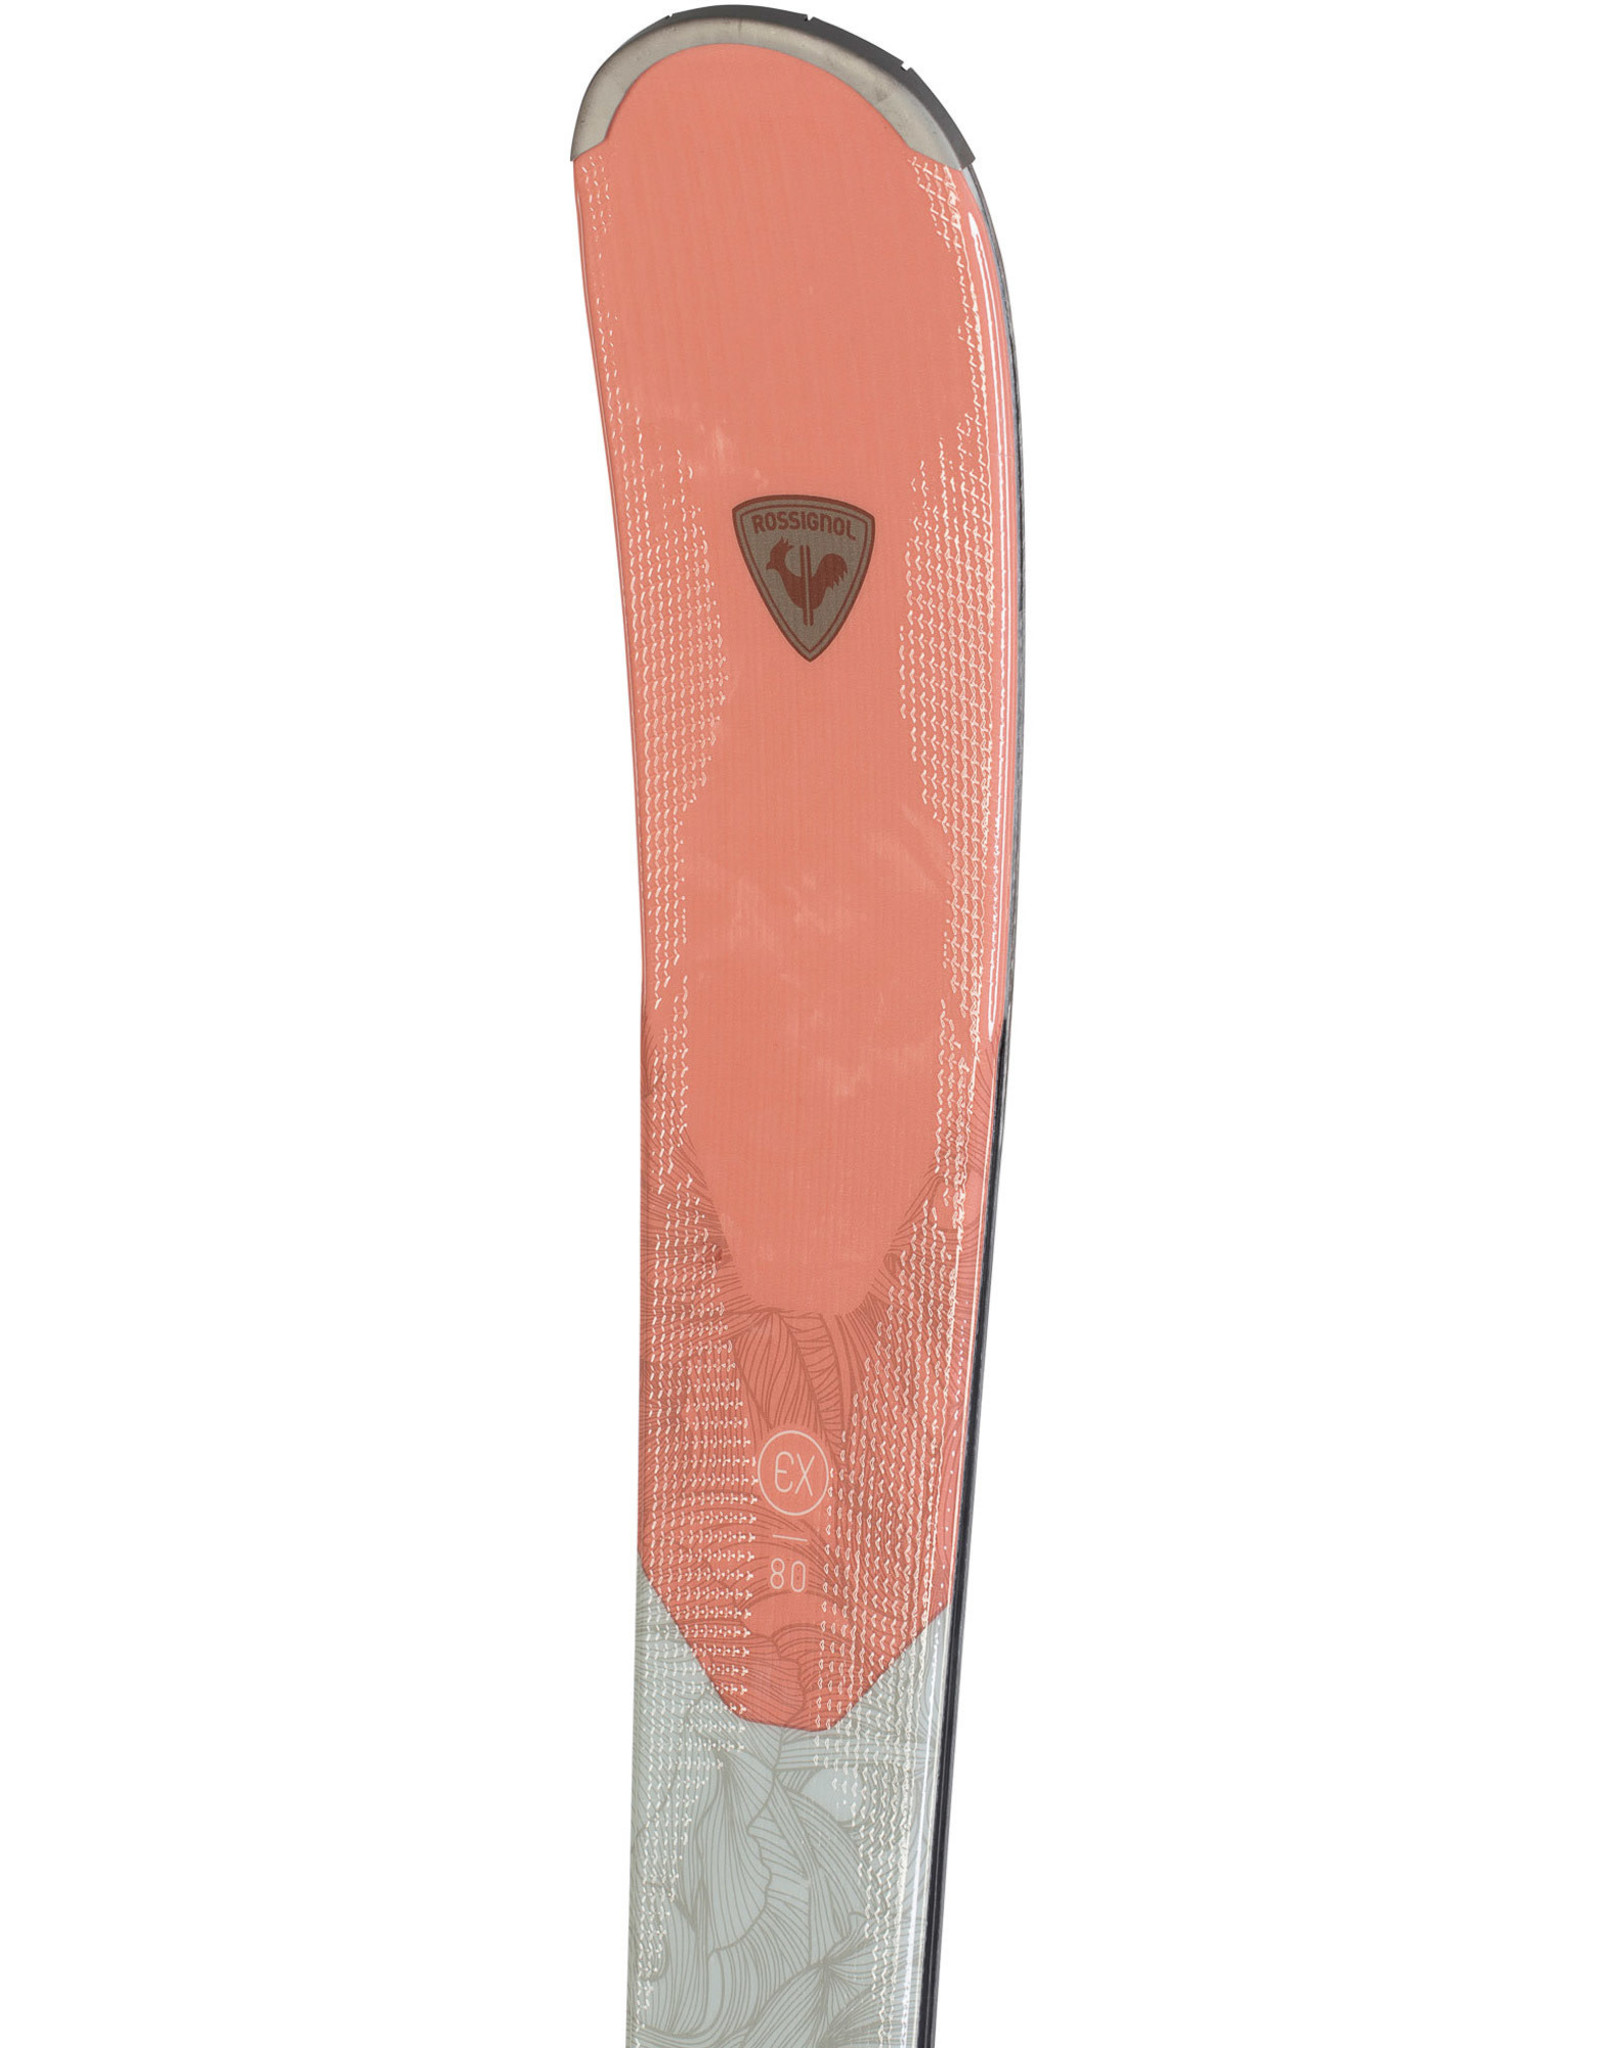 Rossignol EXPERIENCE W 80 CARBON XPRESS XP11